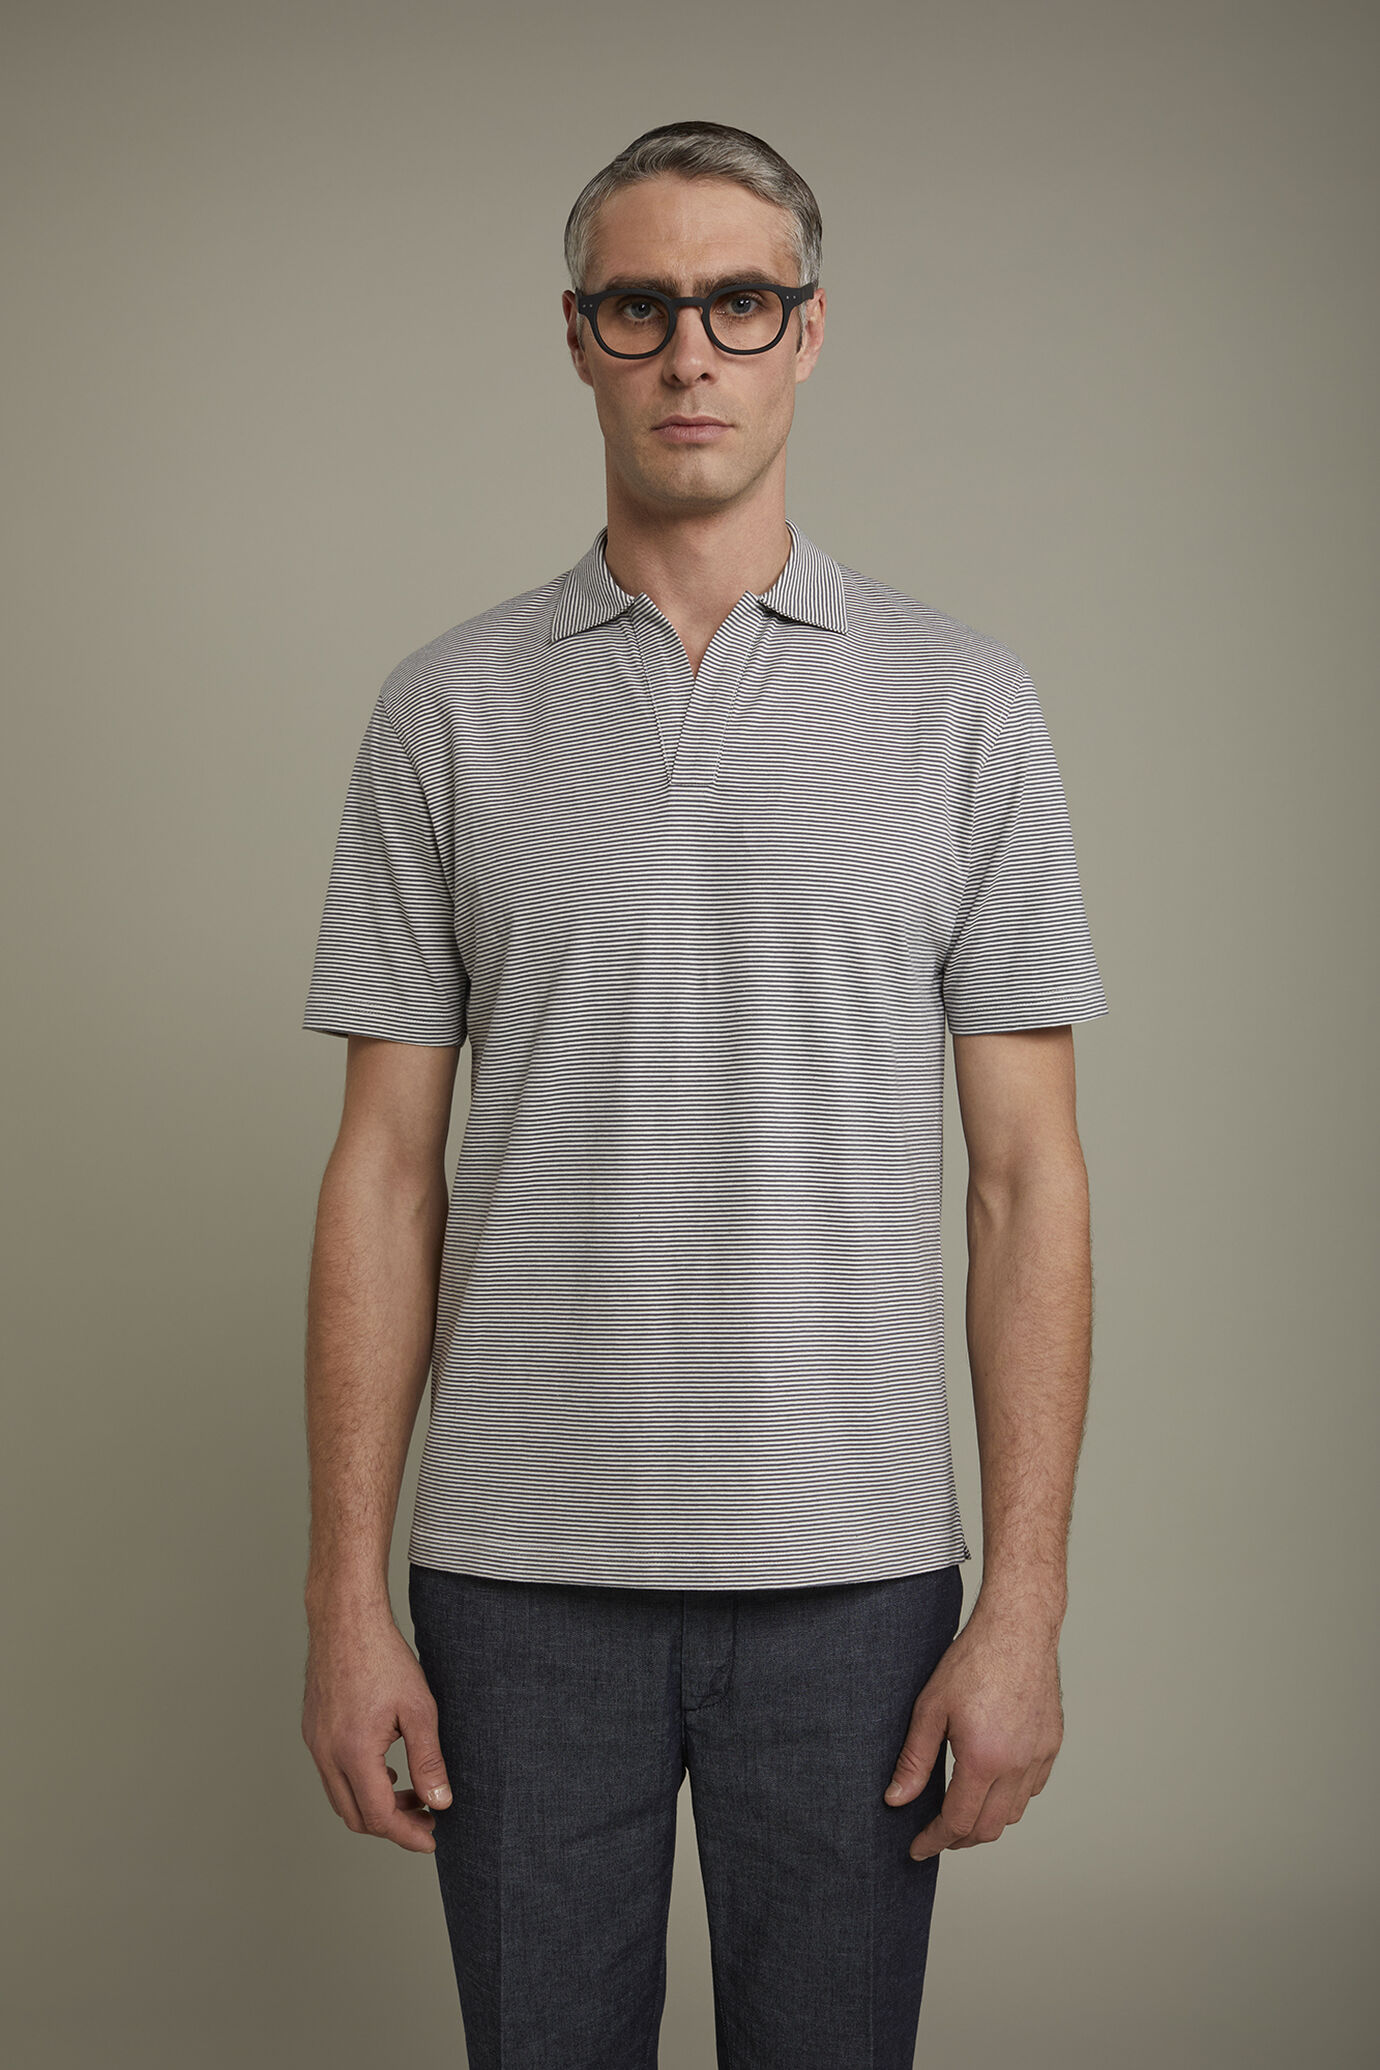 Men’s short sleeve button-less polo shirt with derby collar and thin stripes 100% cotton regular fit image number 2